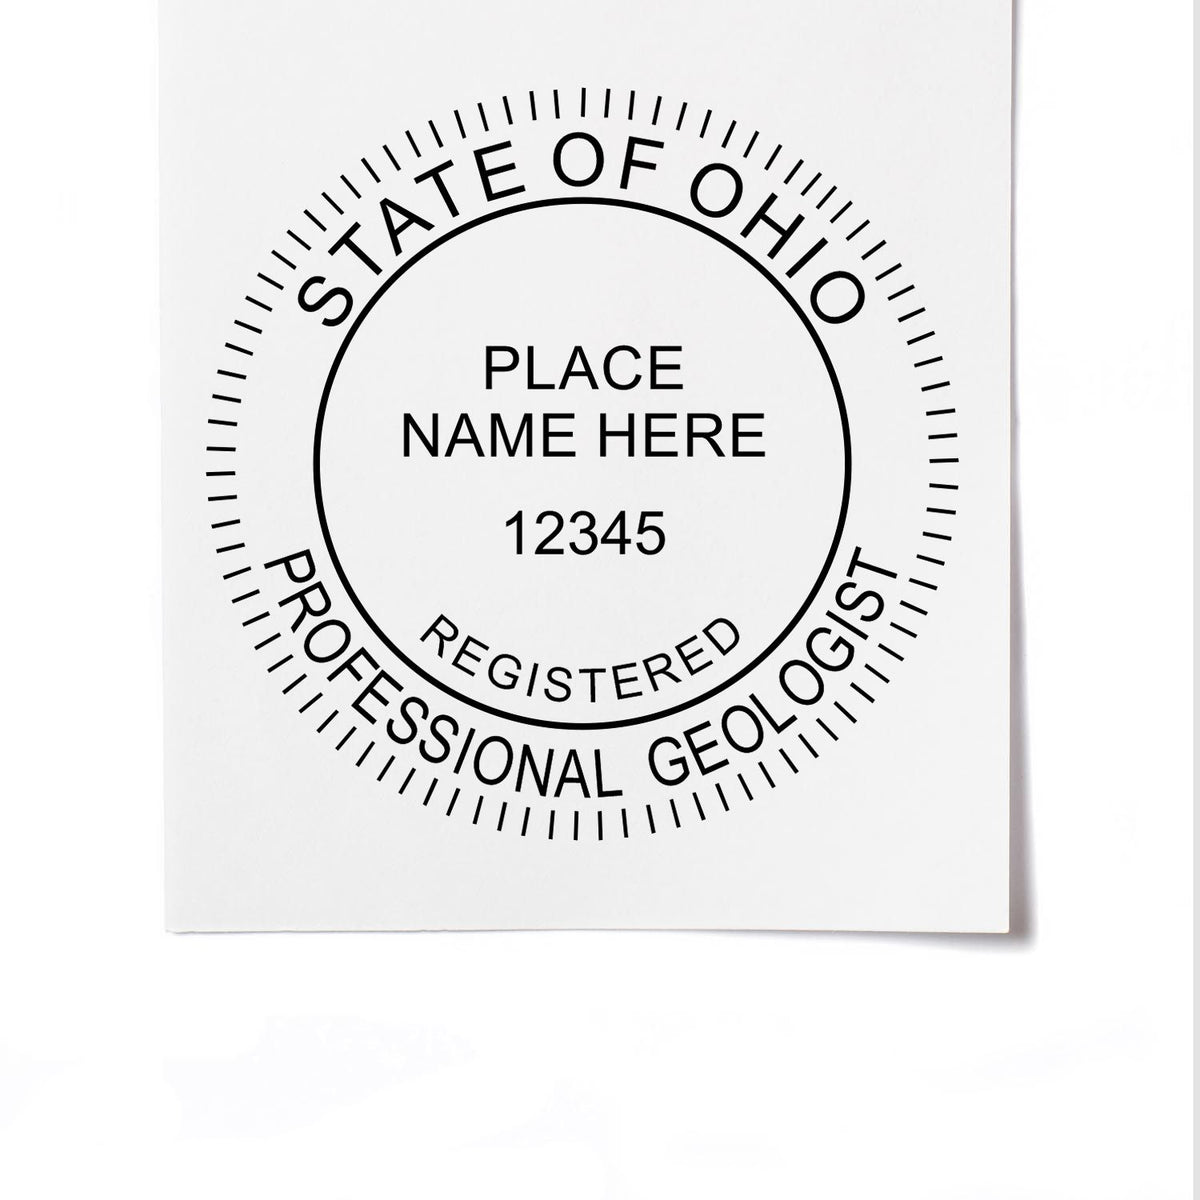 The Ohio Professional Geologist Seal Stamp stamp impression comes to life with a crisp, detailed image stamped on paper - showcasing true professional quality.